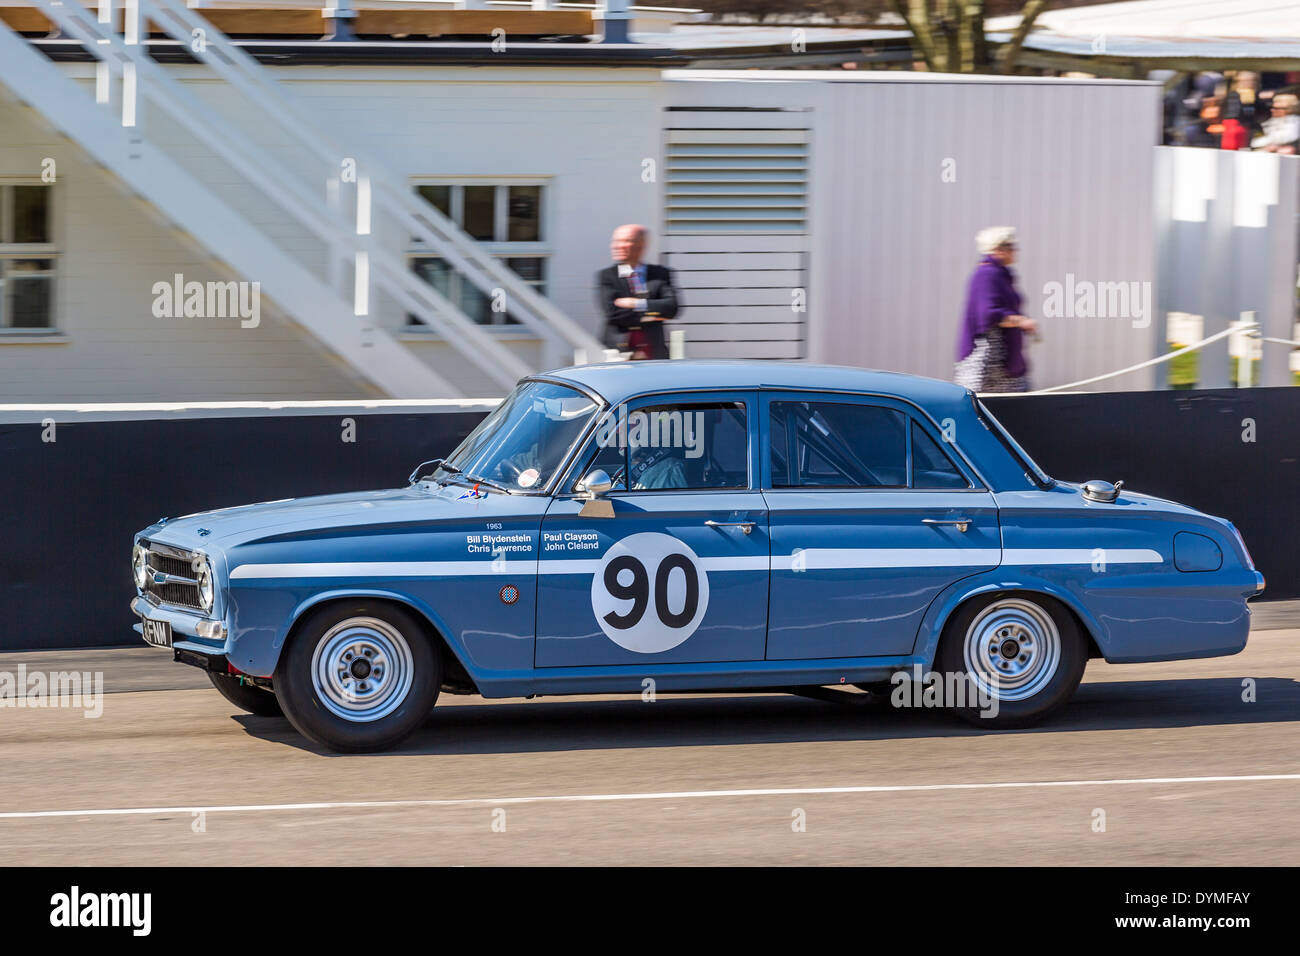 1963 Vauxhall VX 4/90 with driver Paul Clayson during the Sears Trophy race. 72nd Goodwood Members meeting, Sussex, UK. Stock Photo